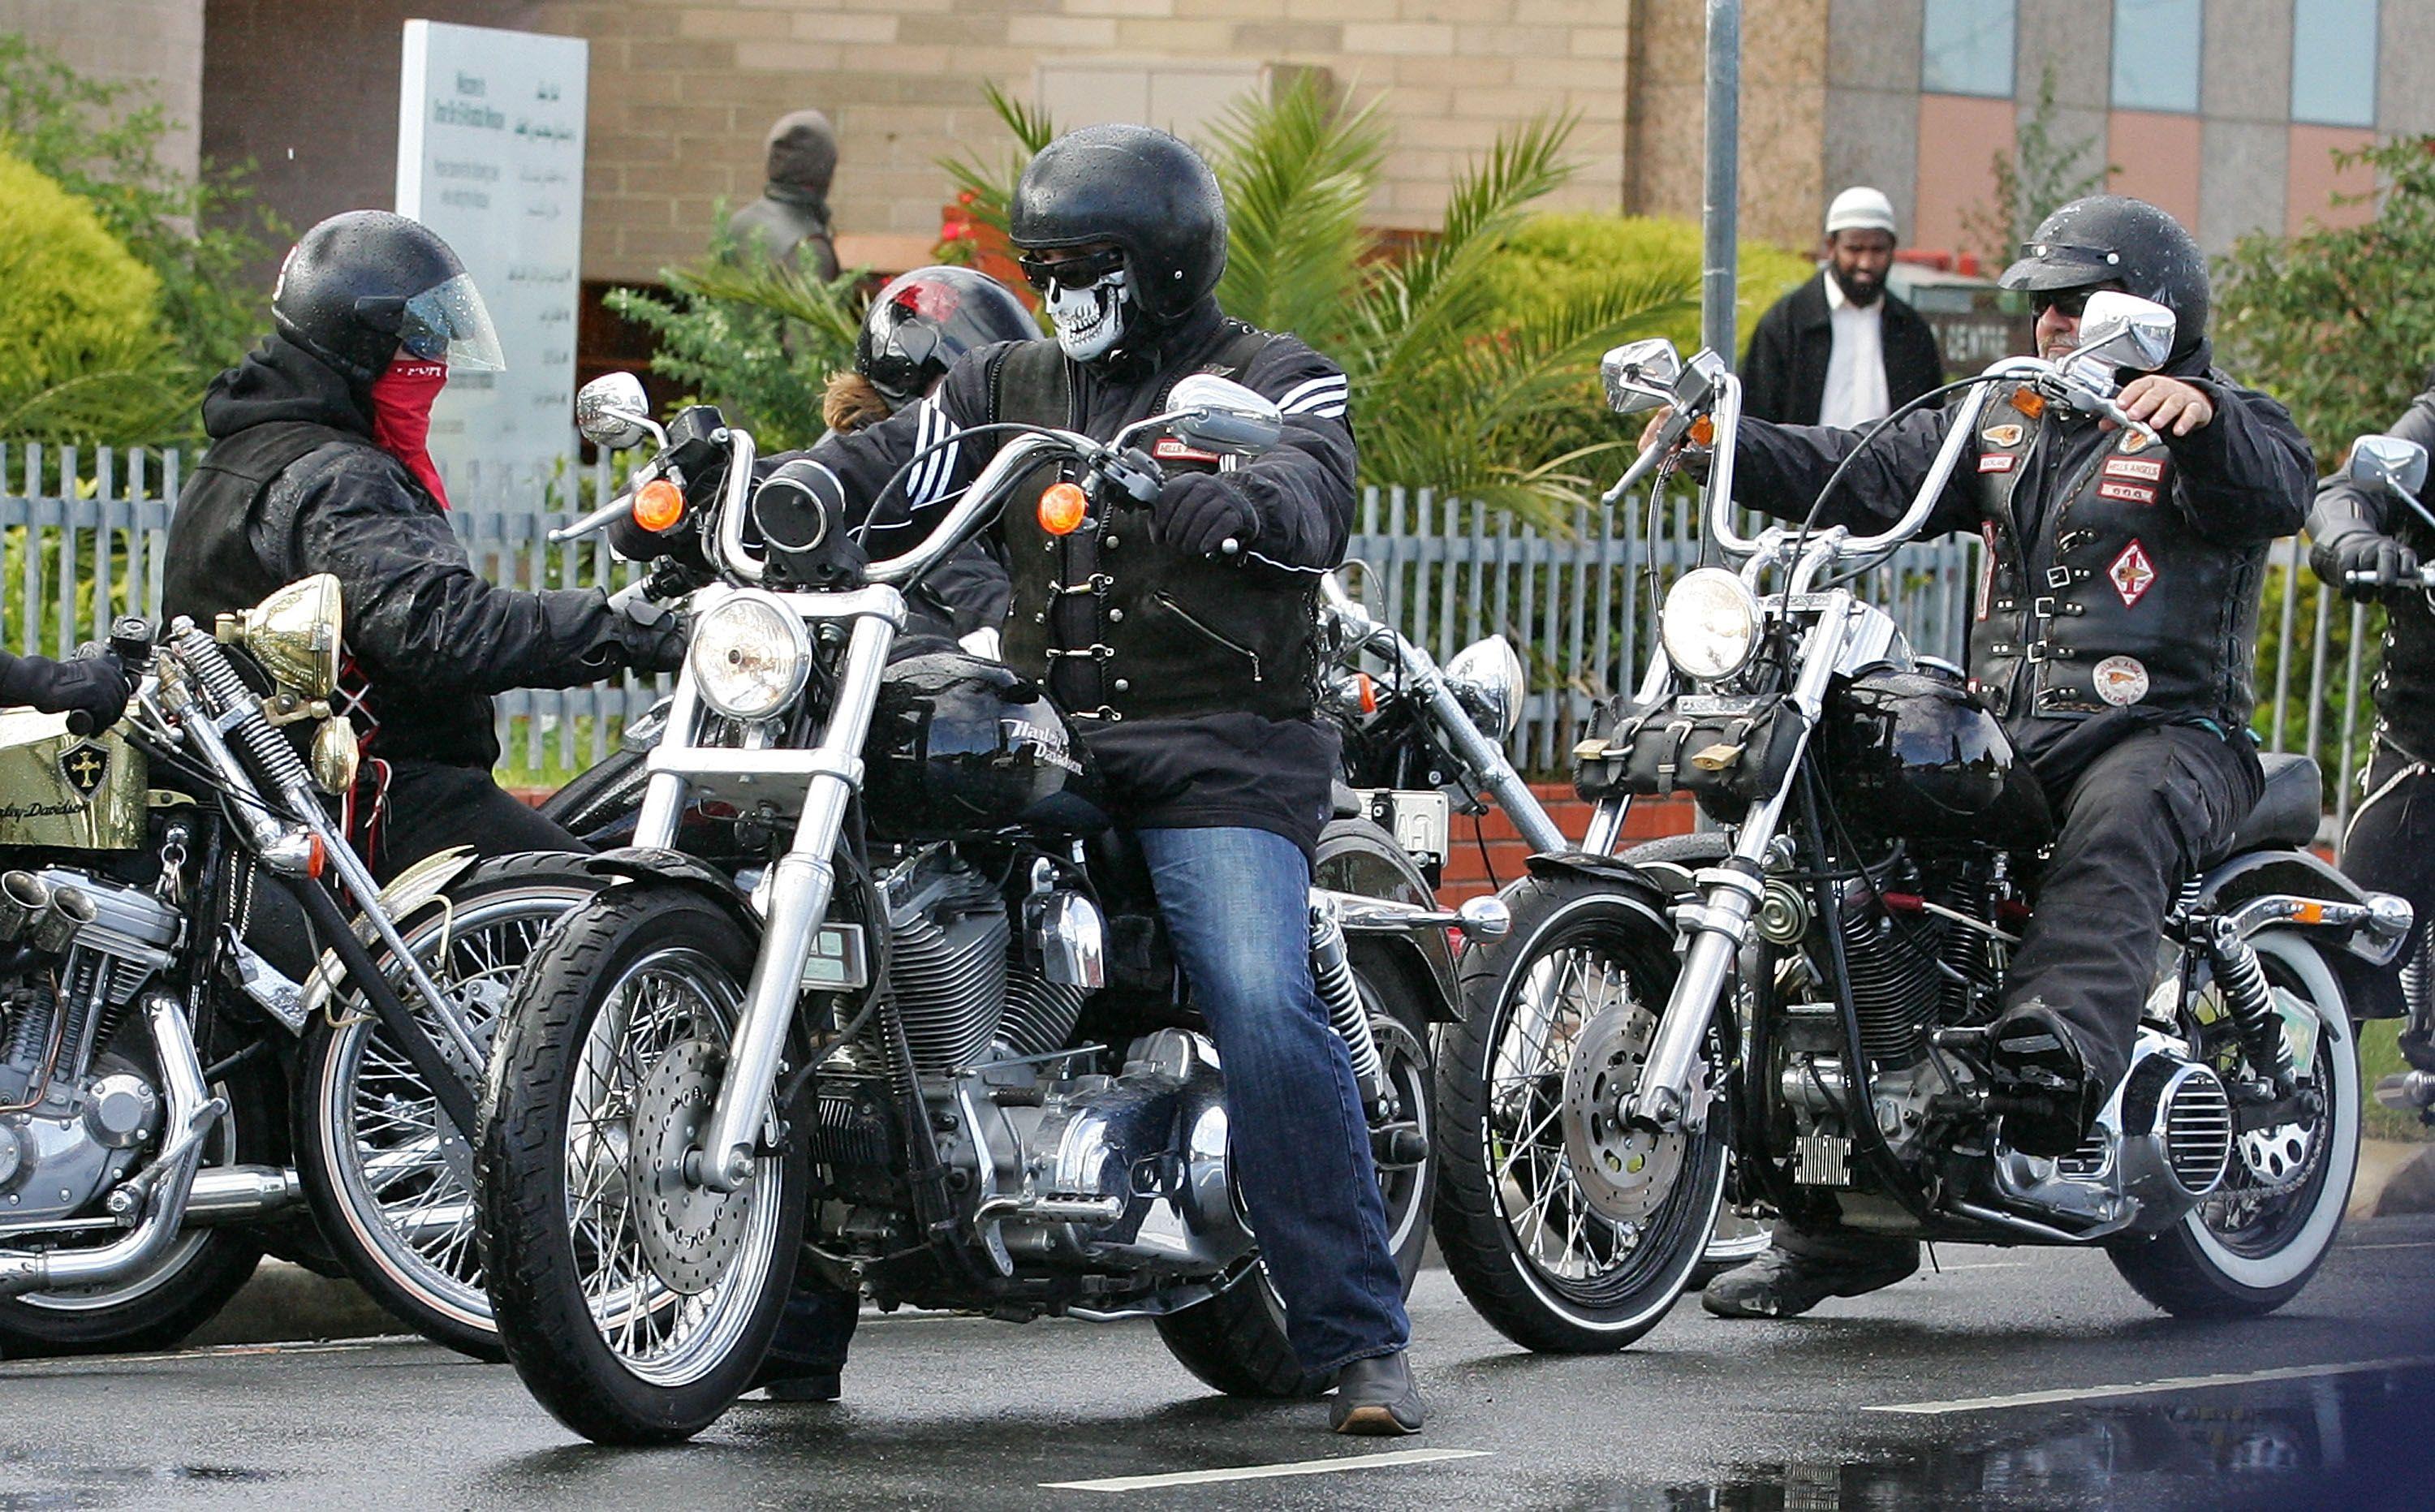 The 8 Most Notorious Biker Gangs In The U.S. Have Pasts That Would